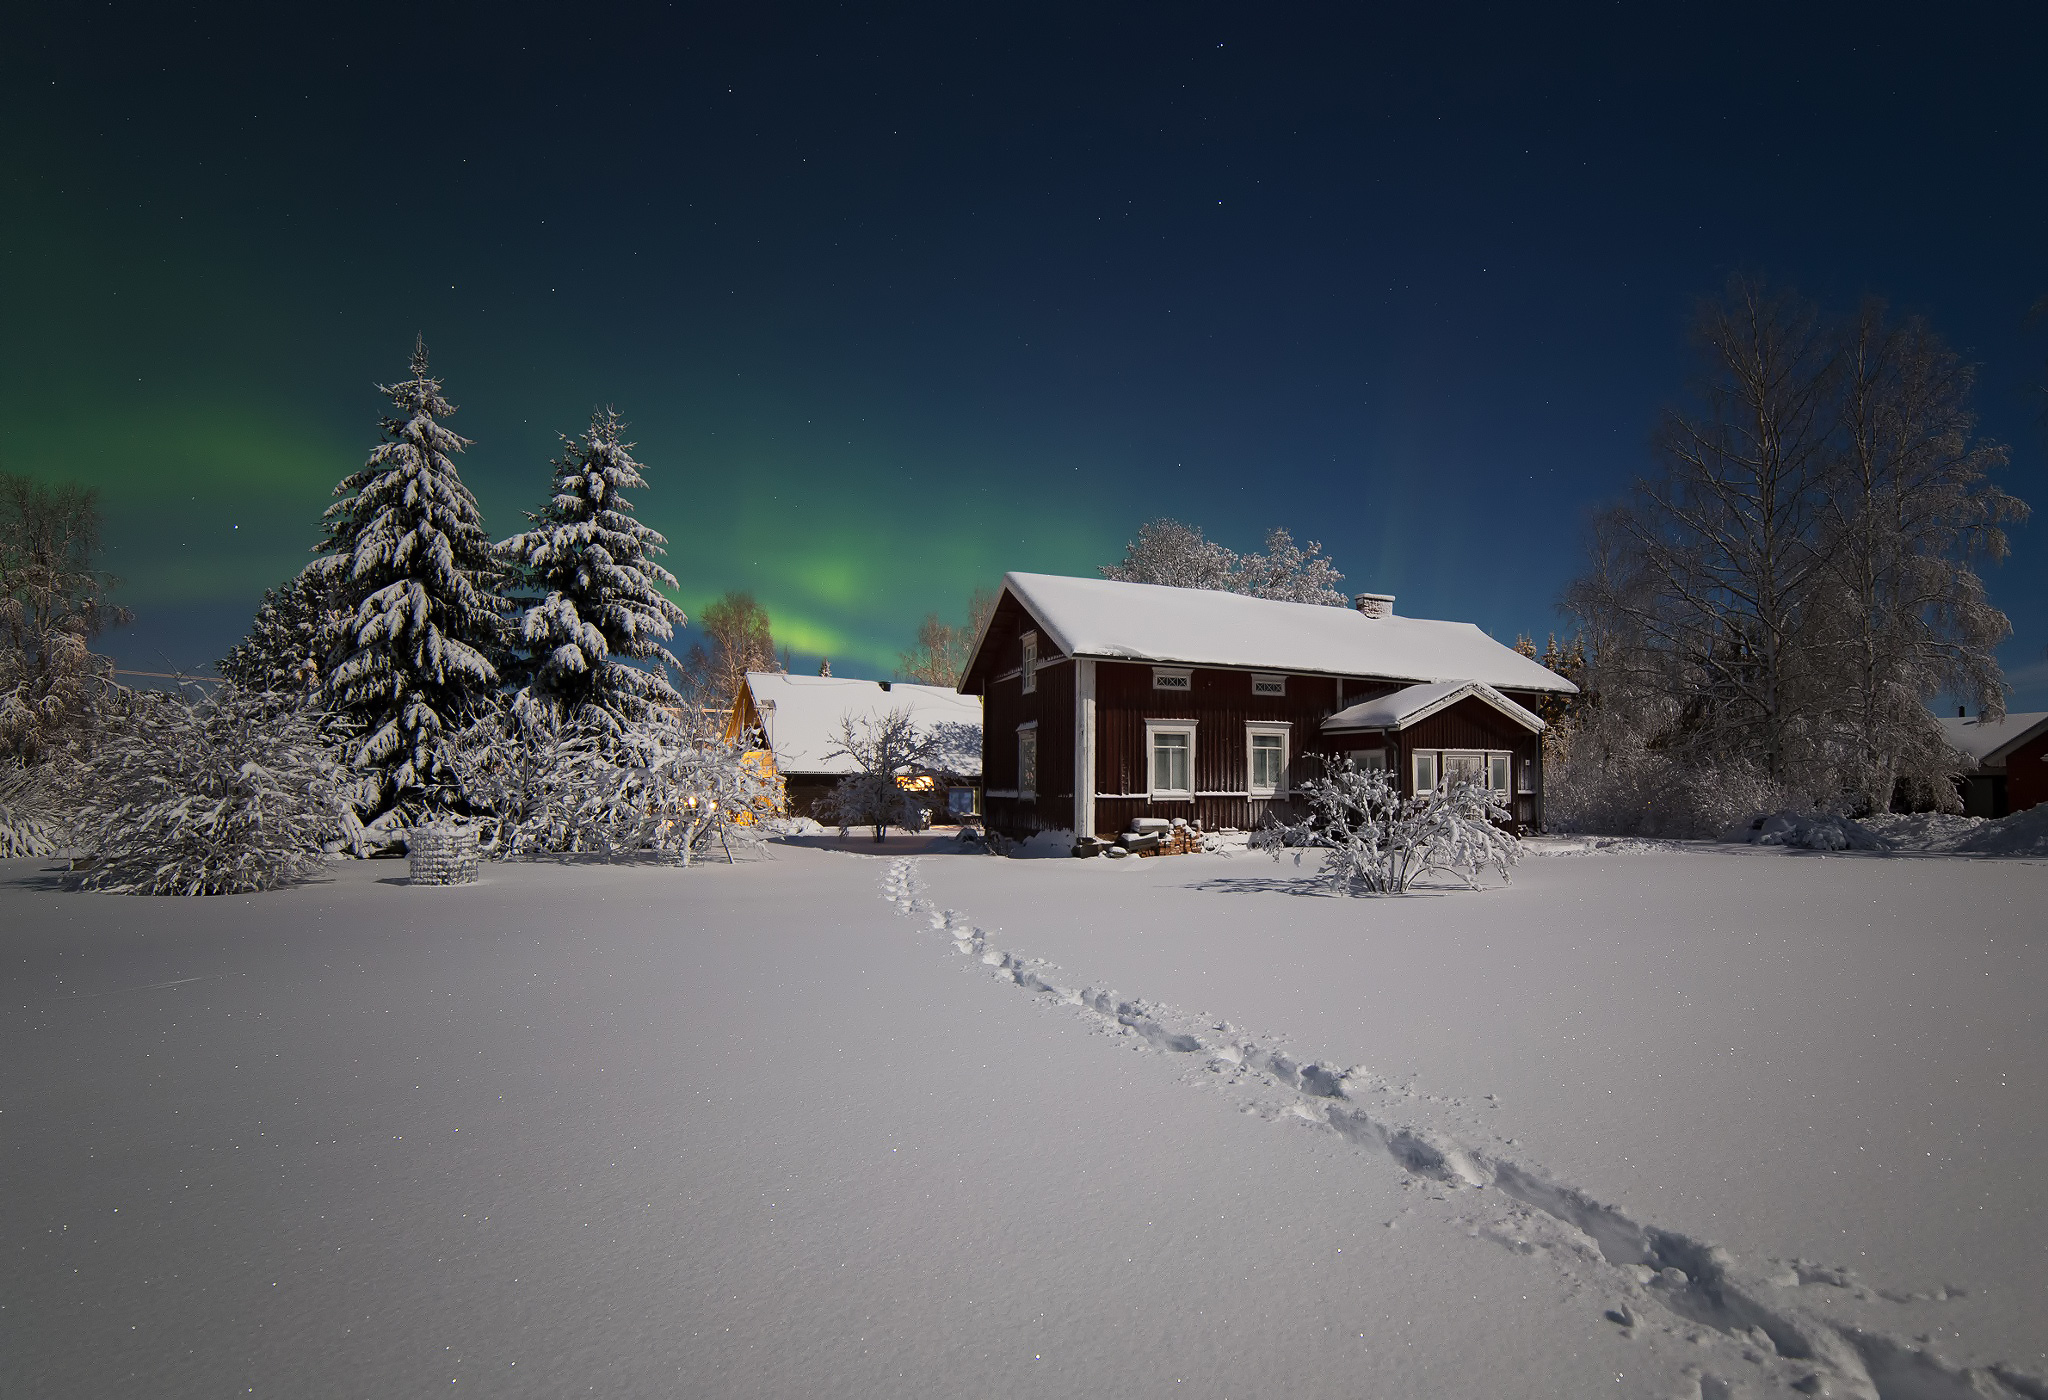 wallpapers winter, snow, house, aurora borealis, trees, nature, northern lights